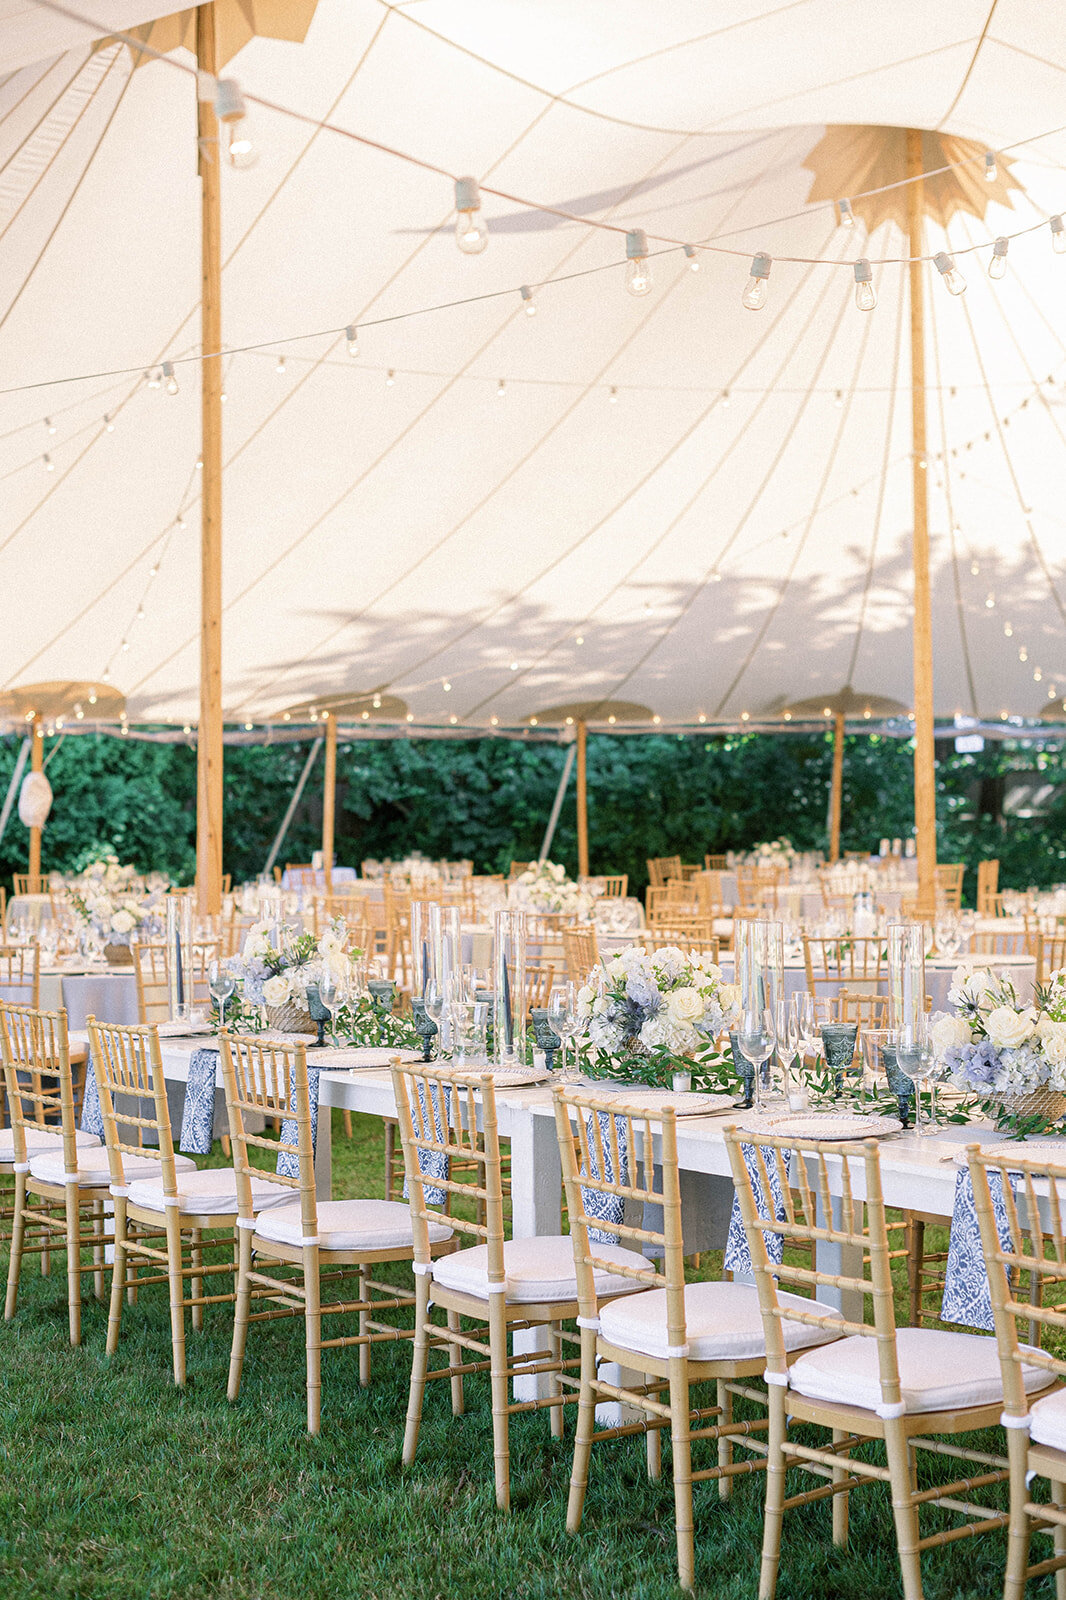 Kate-Murtaugh-Events-tented-wedding-planner-farm-table